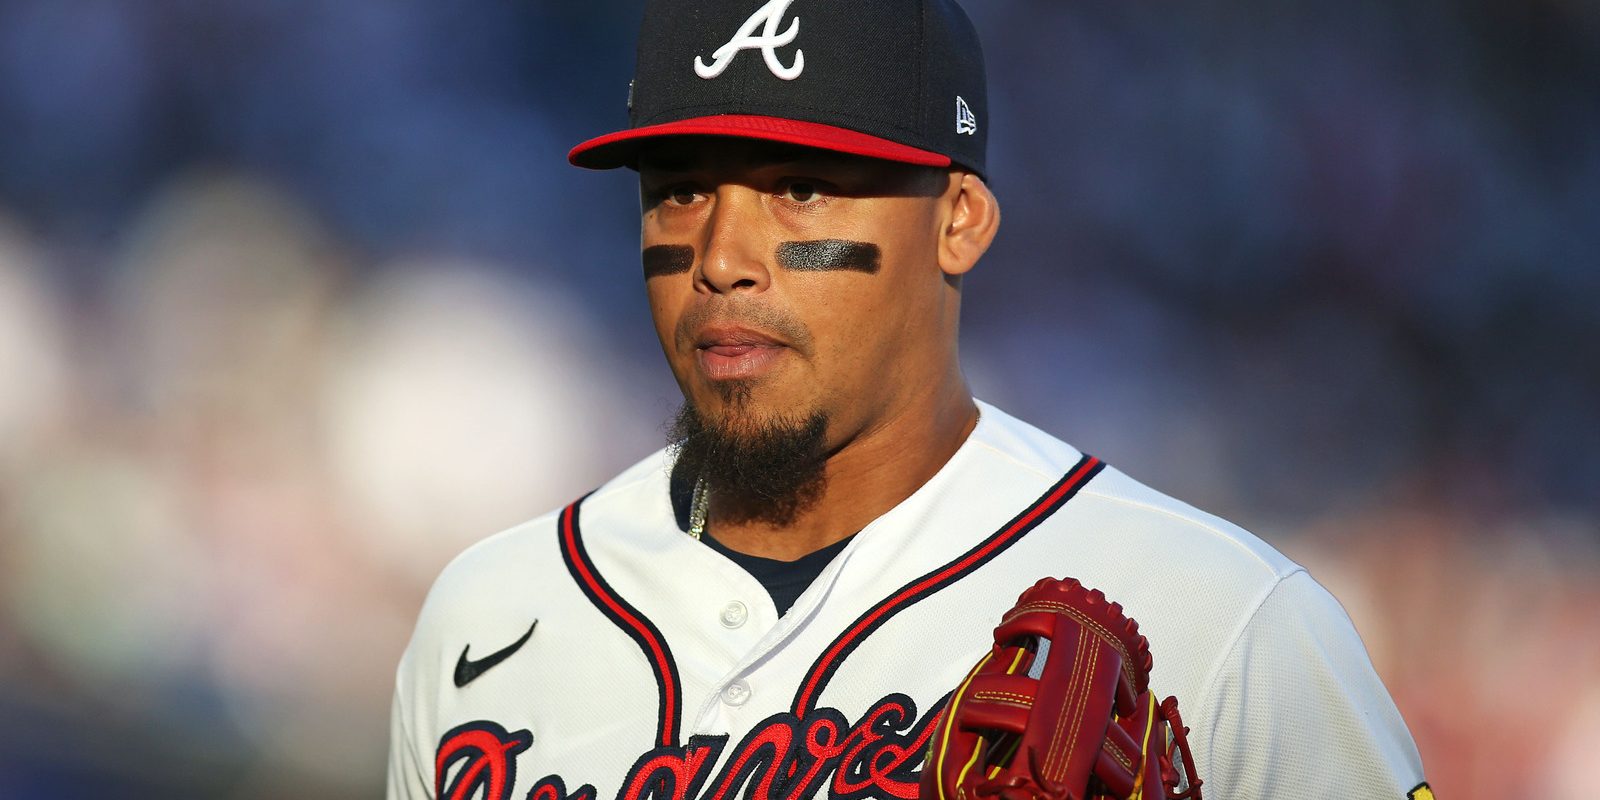 Braves doomed themselves in NLDS with unnecessary distraction